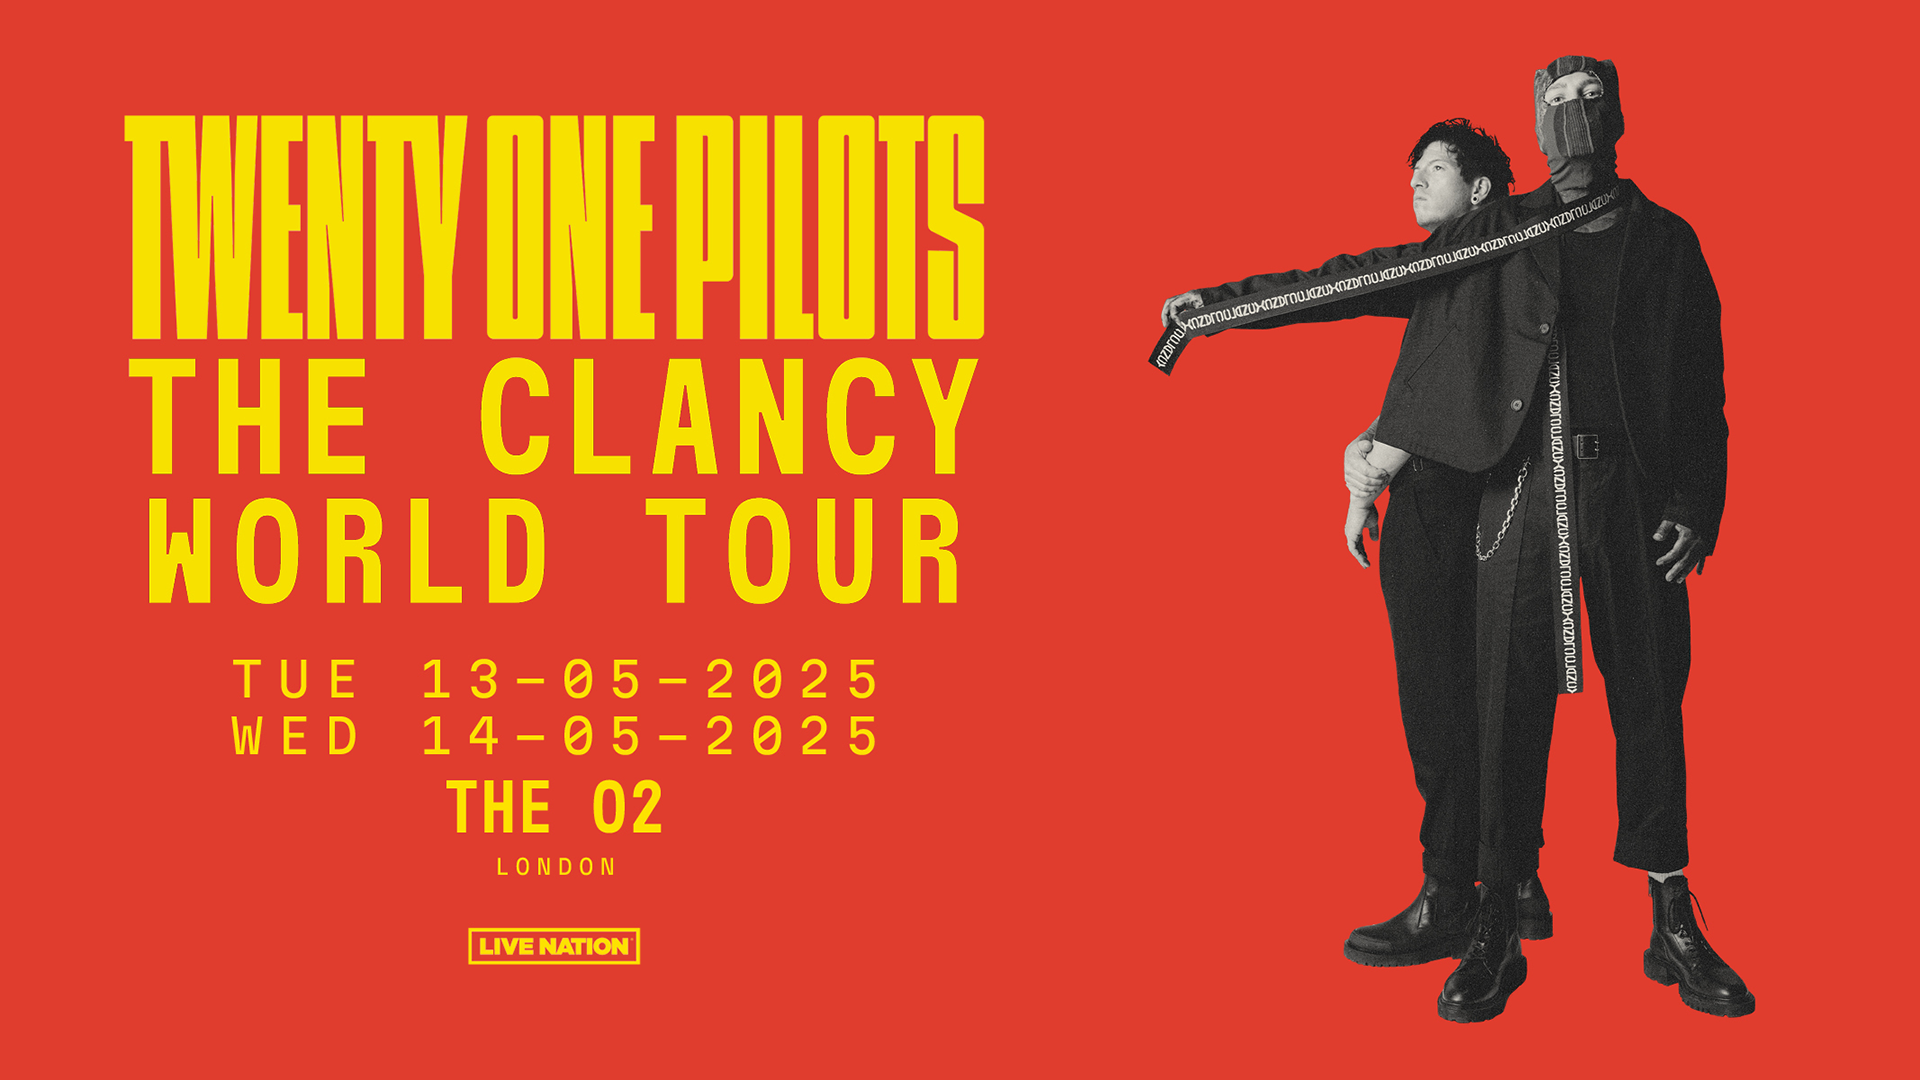 Twenty Pilots Tour Artwork with red background and yellow text and image of the band